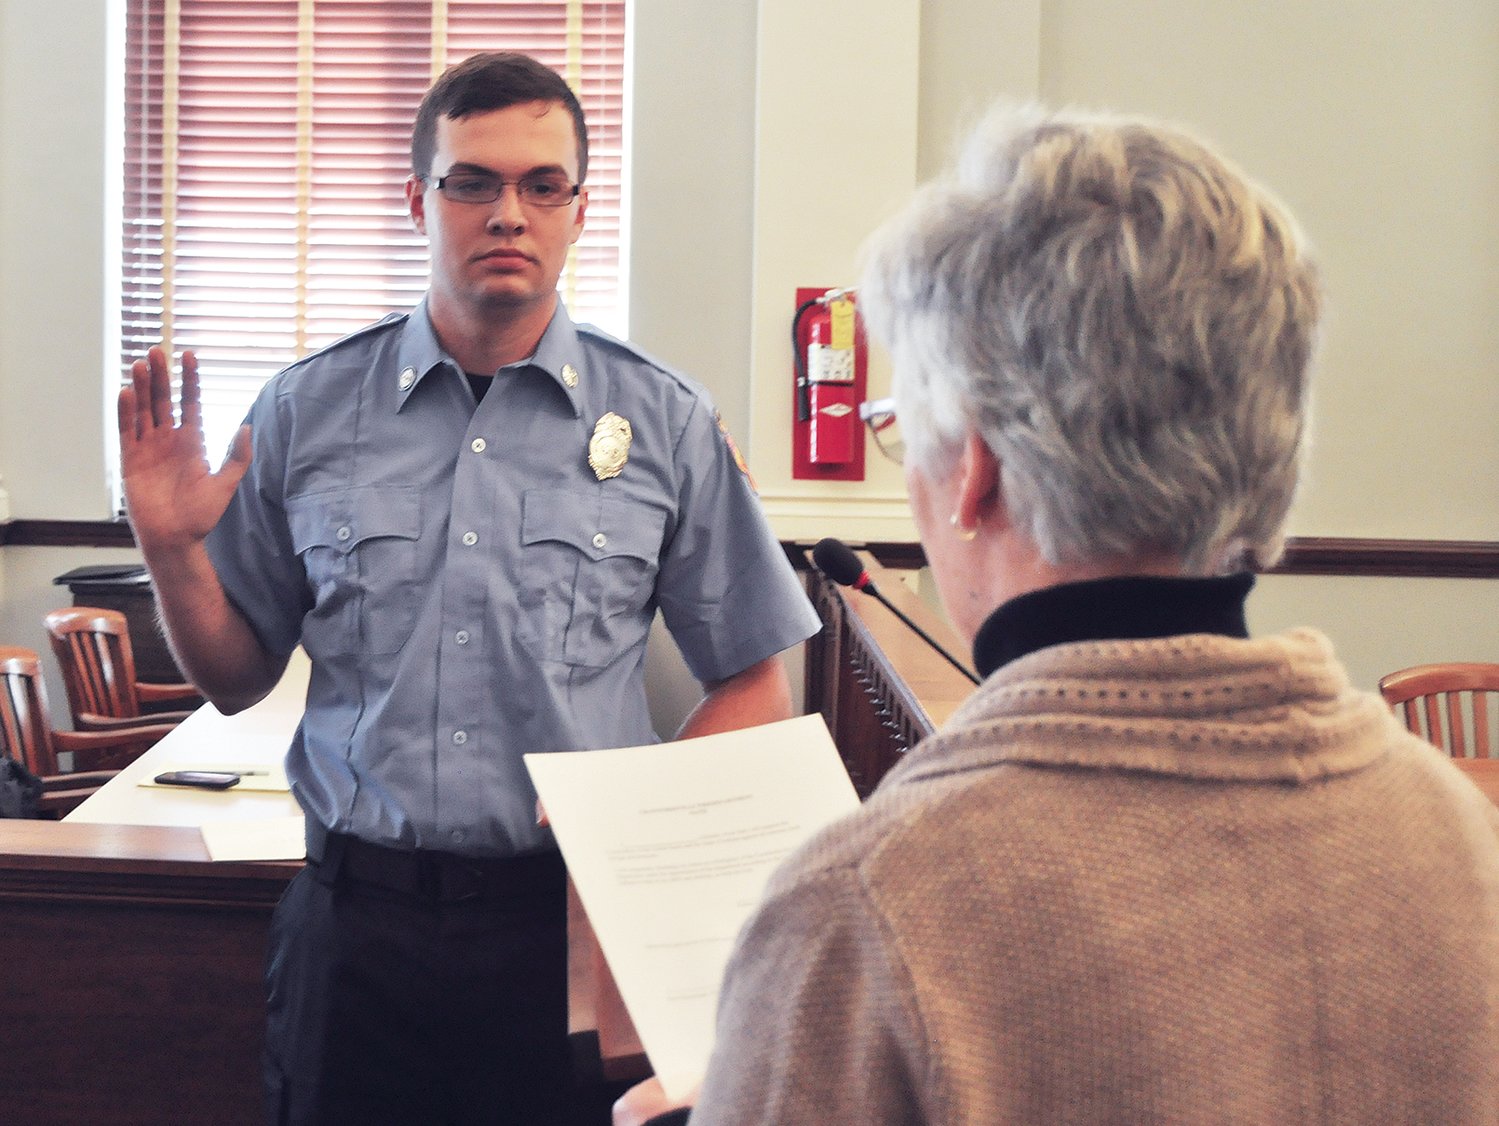 New Crawfordsville firefighter Kolten Cromwell is sworn in by clerk-treasurer Terri Gadd Wednesday at the City Building. Cromwell is the fifth member of the department to graduate from the West Central Career and Technical Education Cooperative's fire and rescue class.